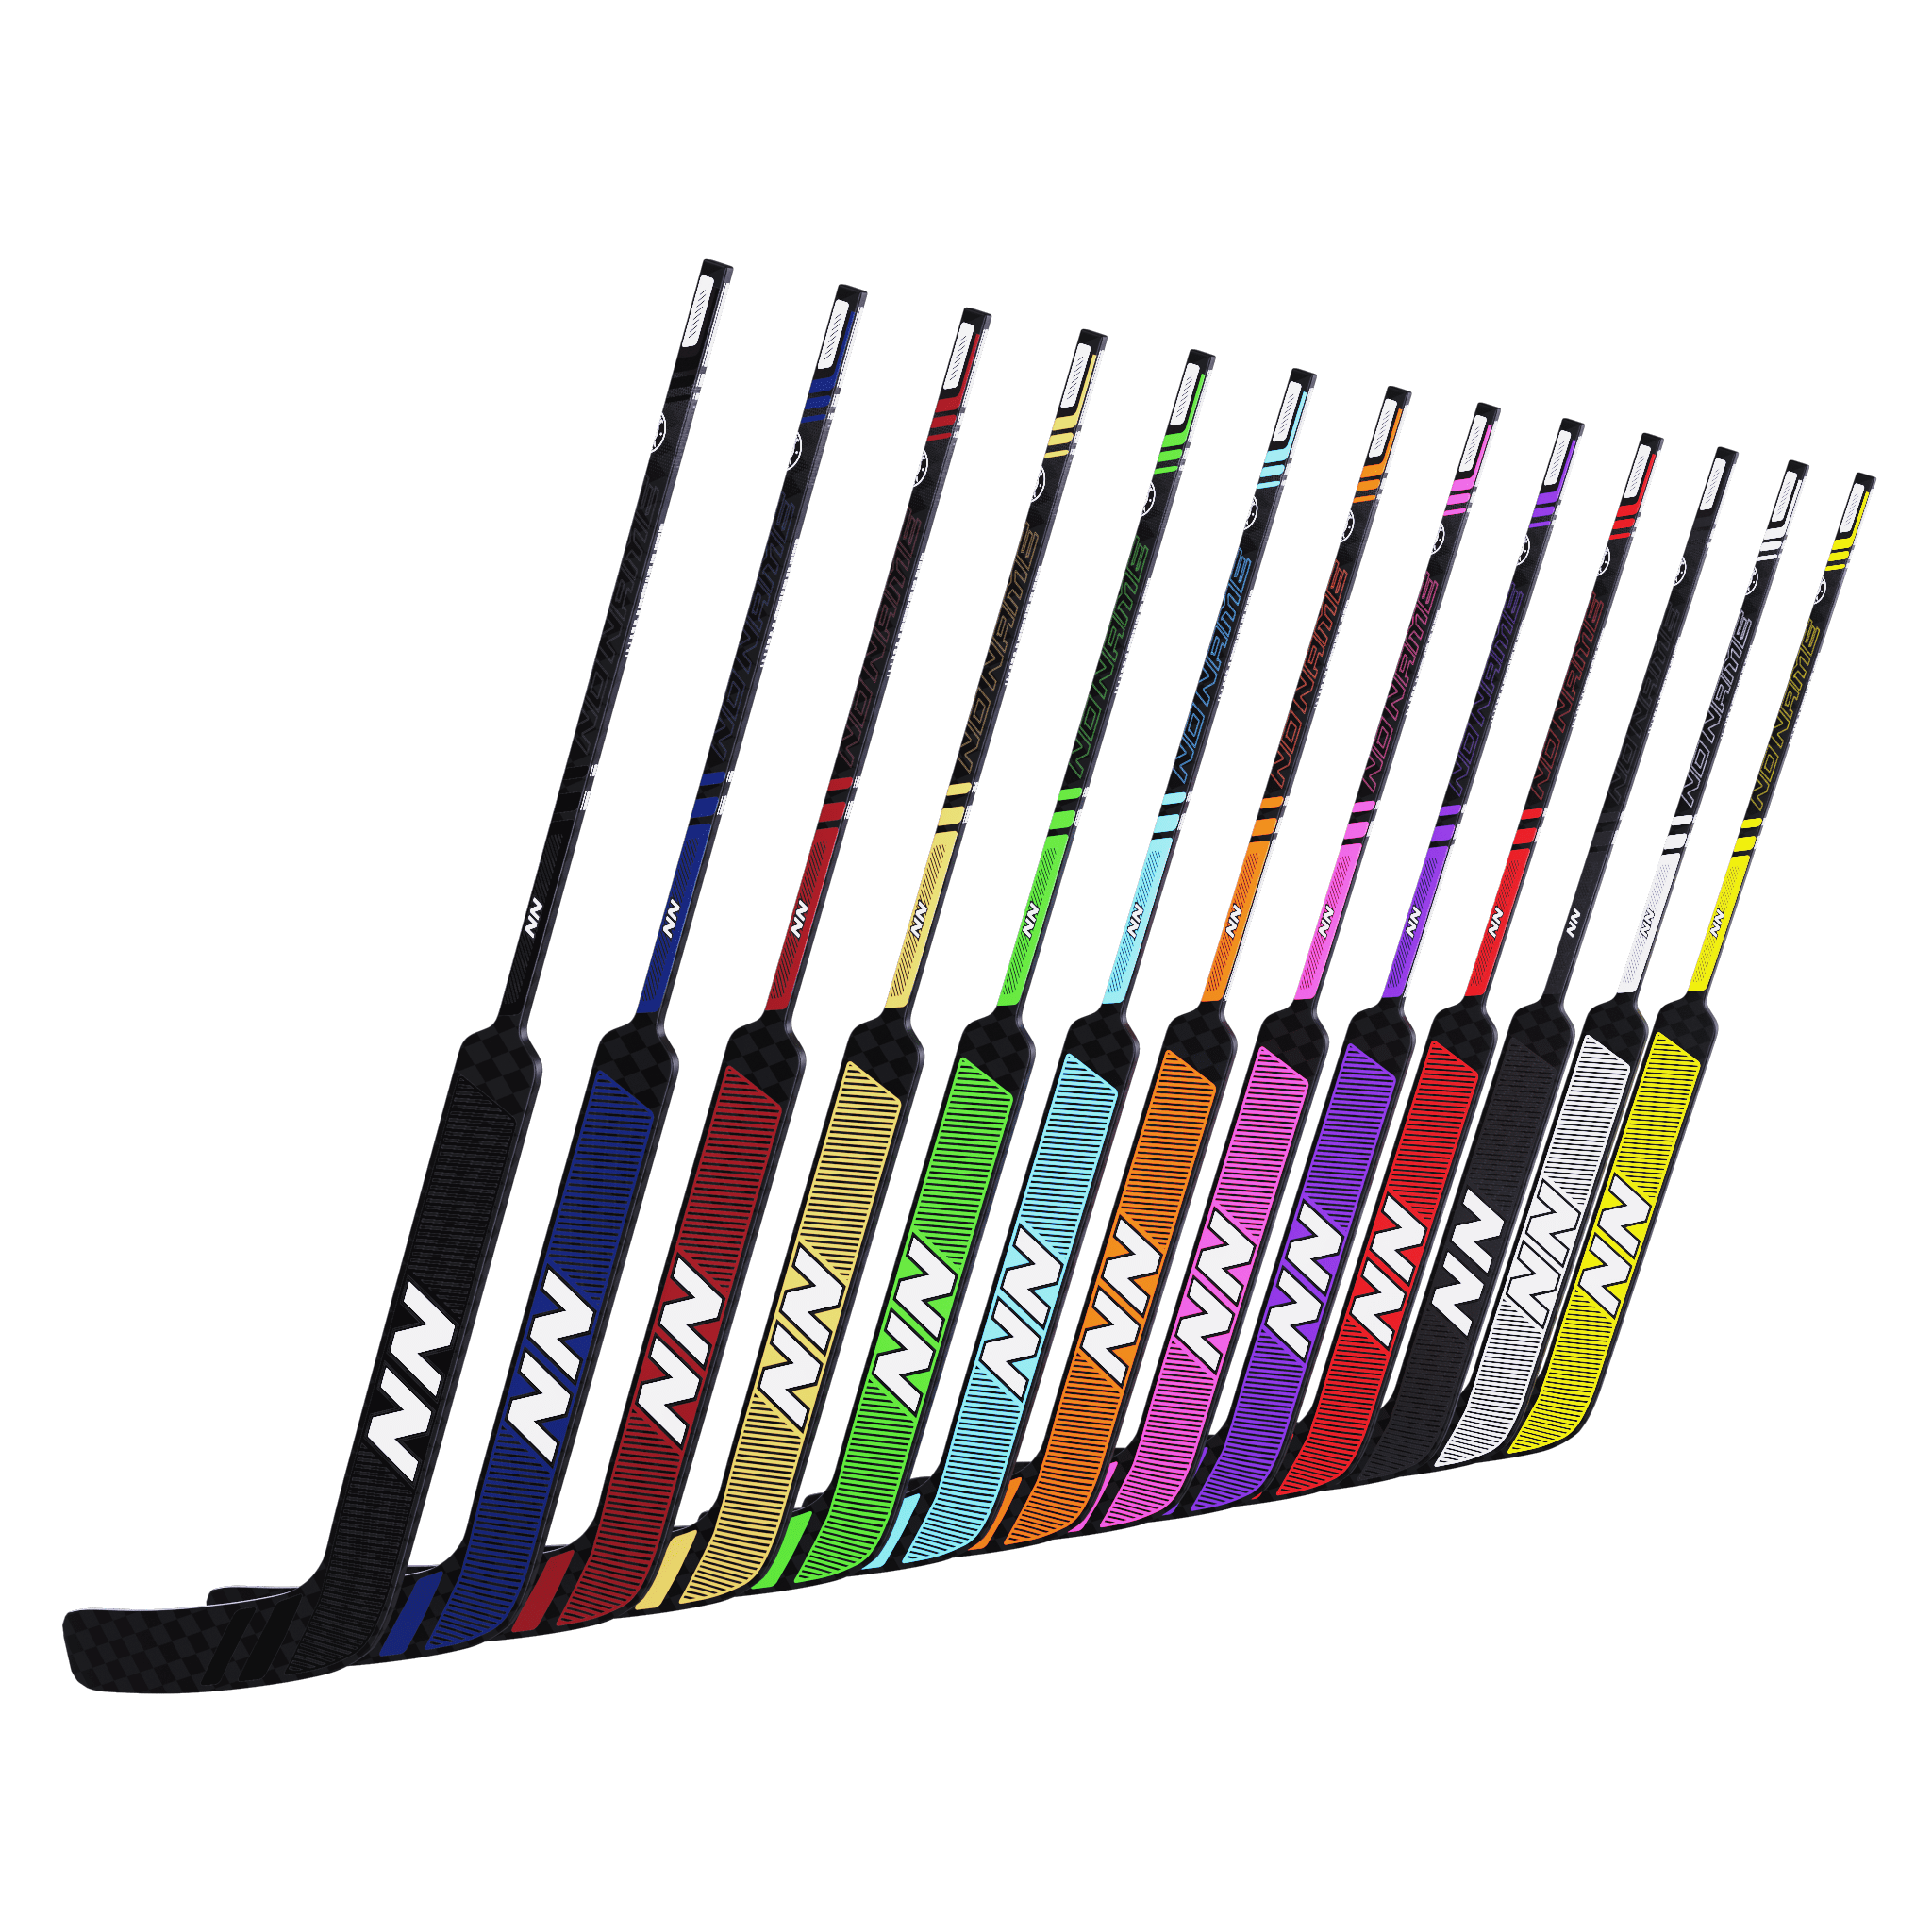 Personalized Hockey Decal, Hockey Sticks With Name, Personalized